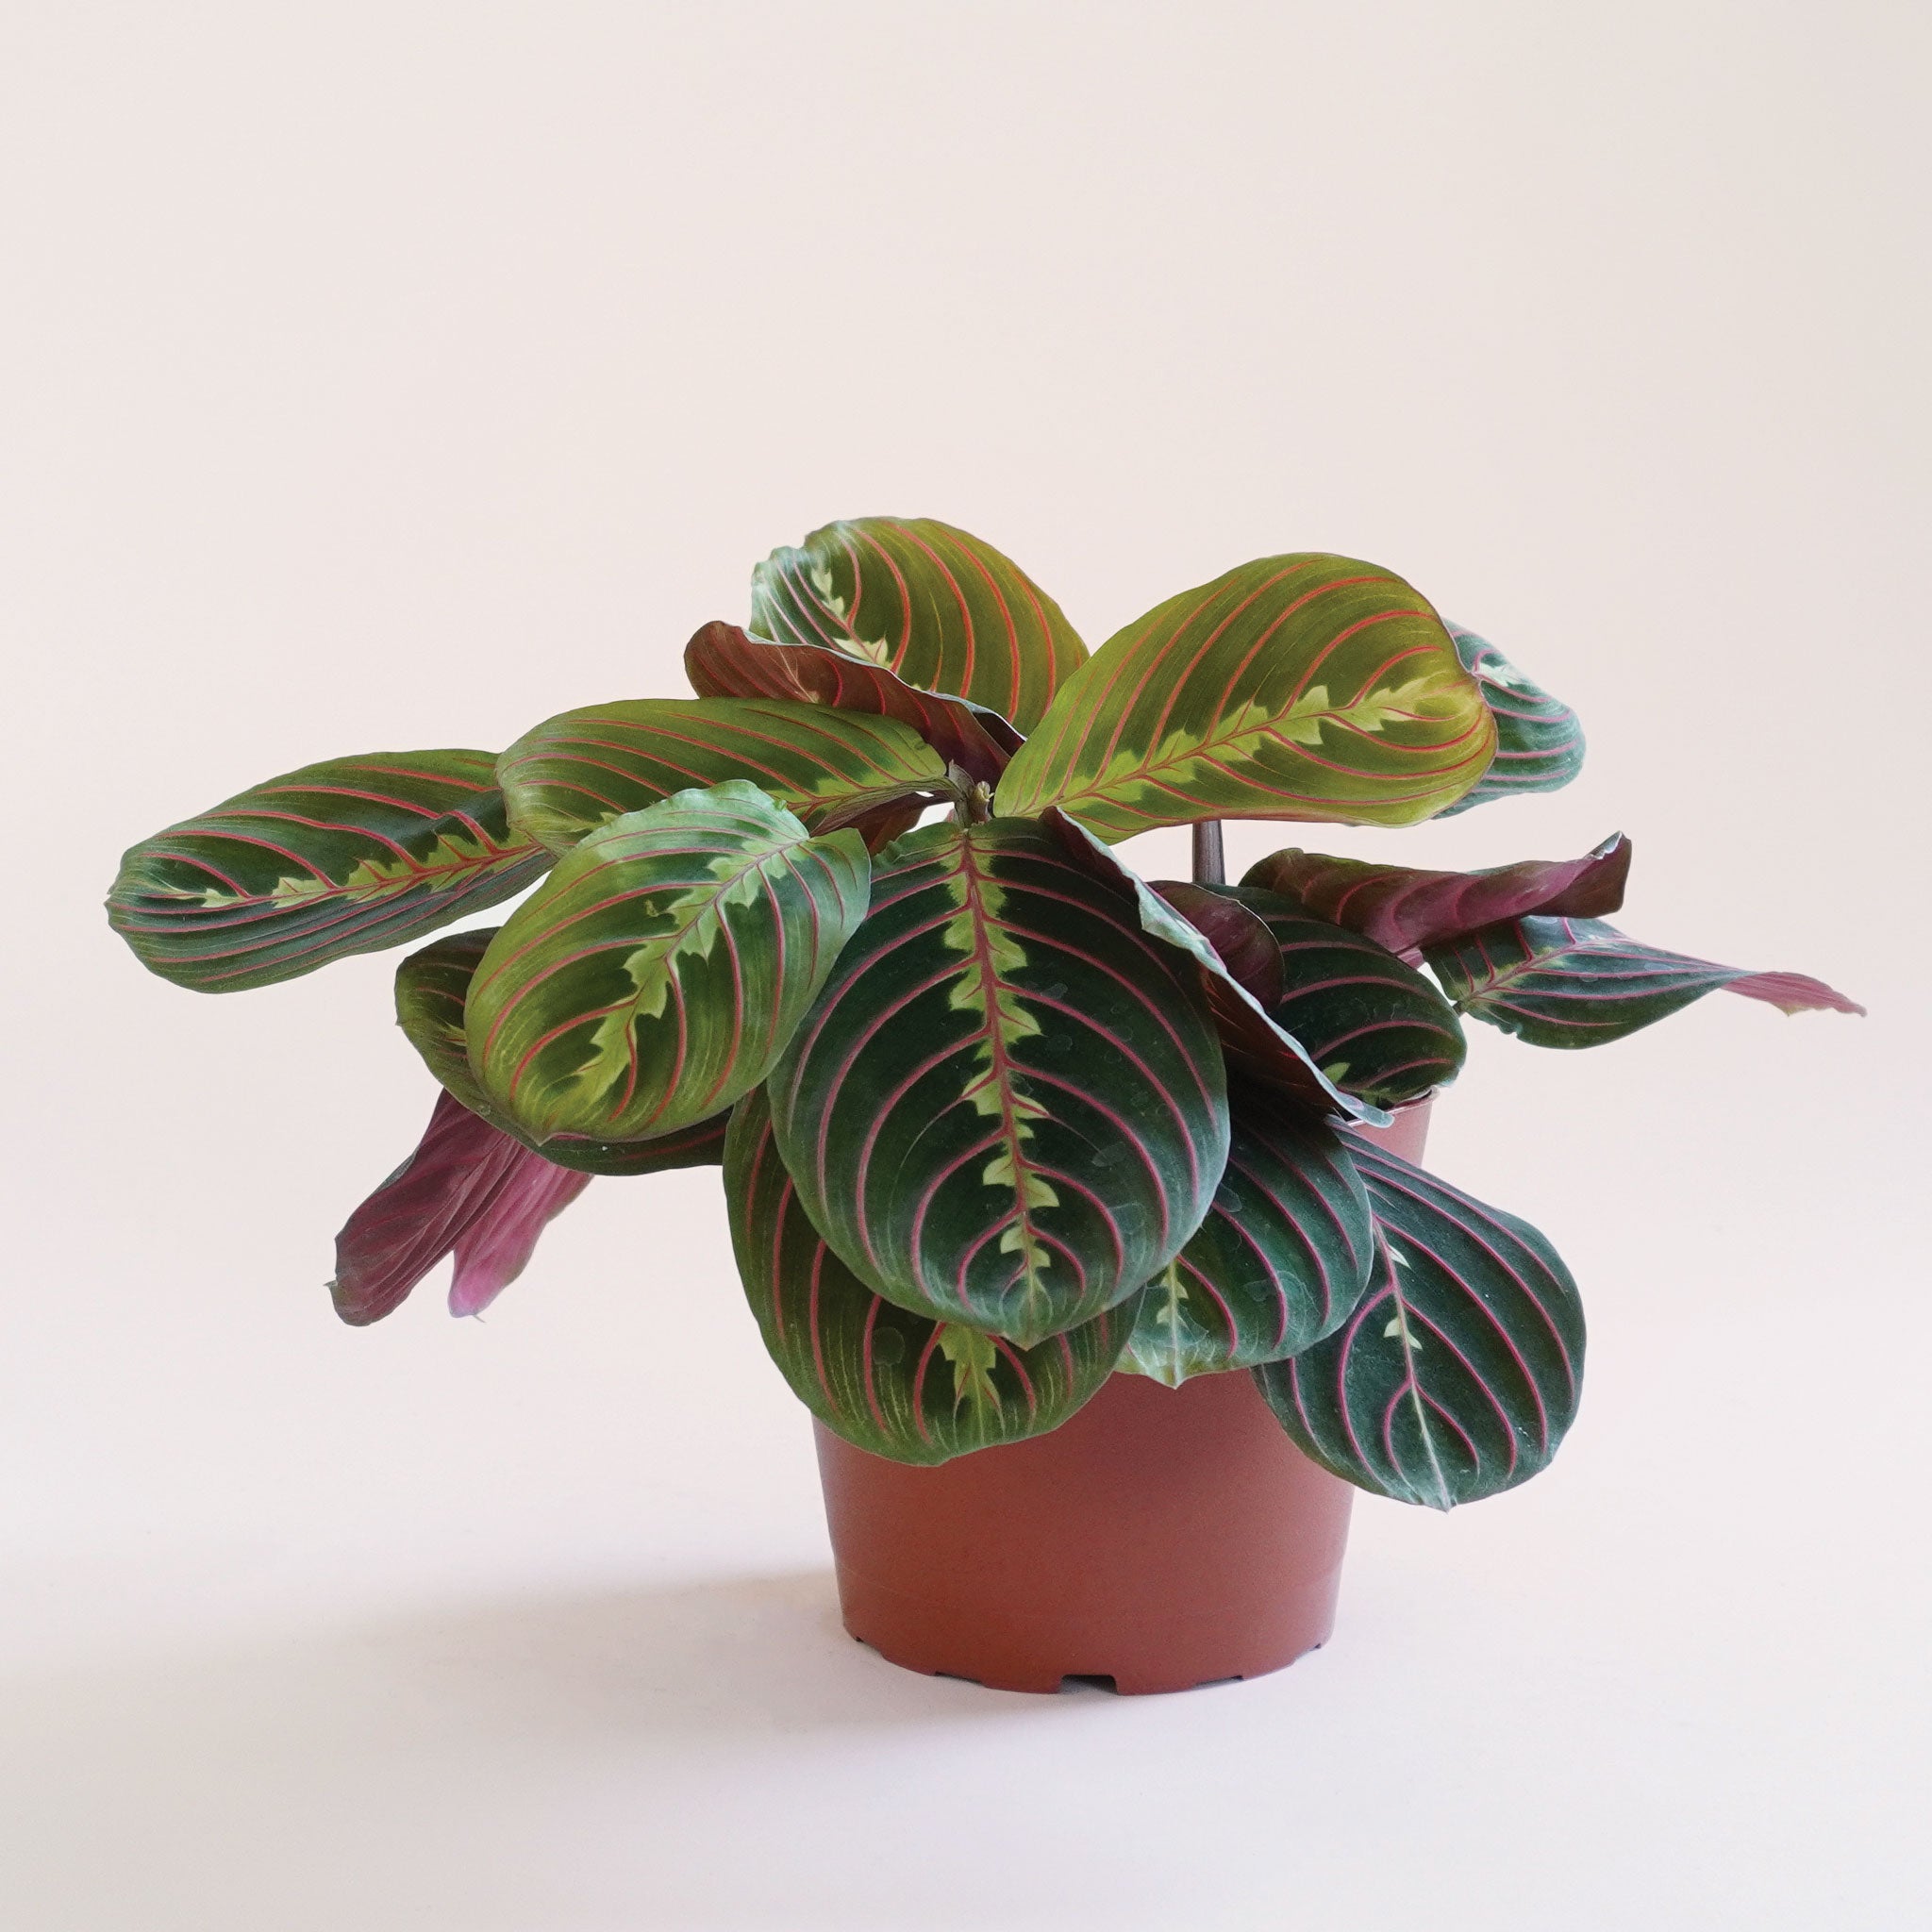 a maranta prayer plant featuring dark green leaves with red veining and a red underside.